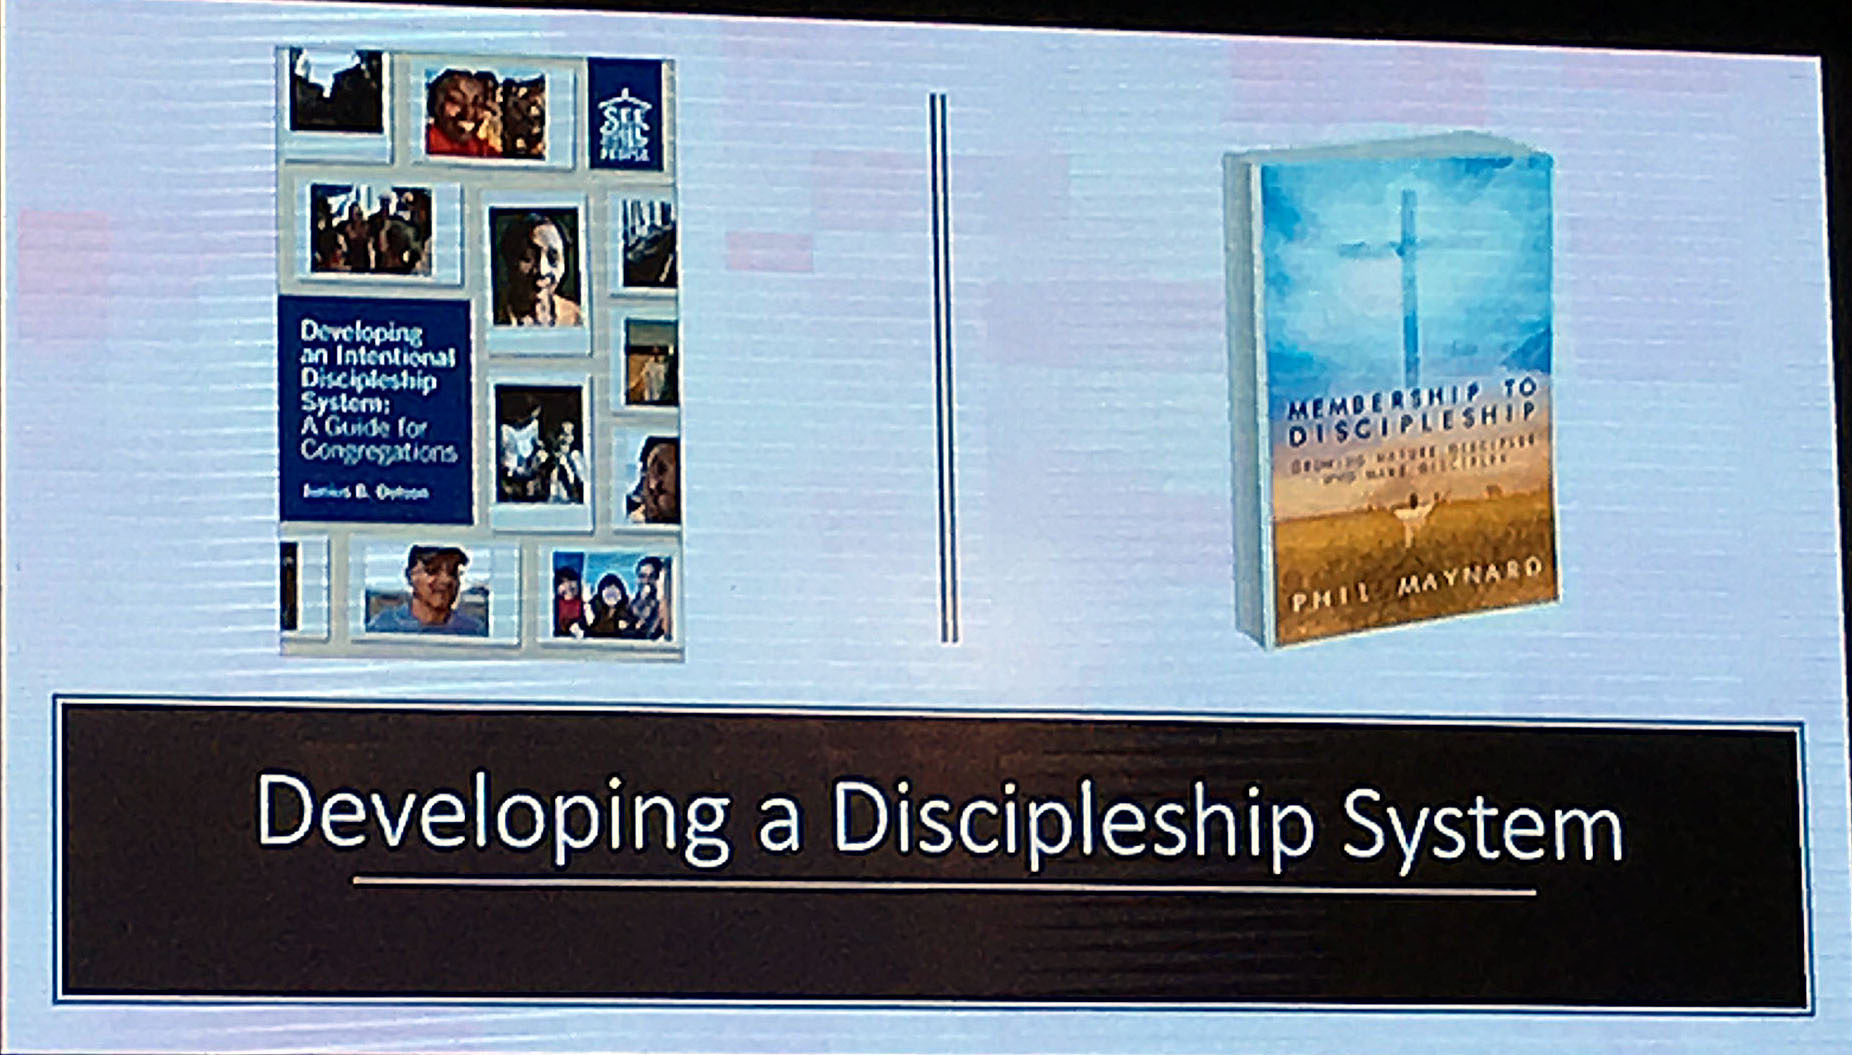 Recommended books for developing a Discipleship System